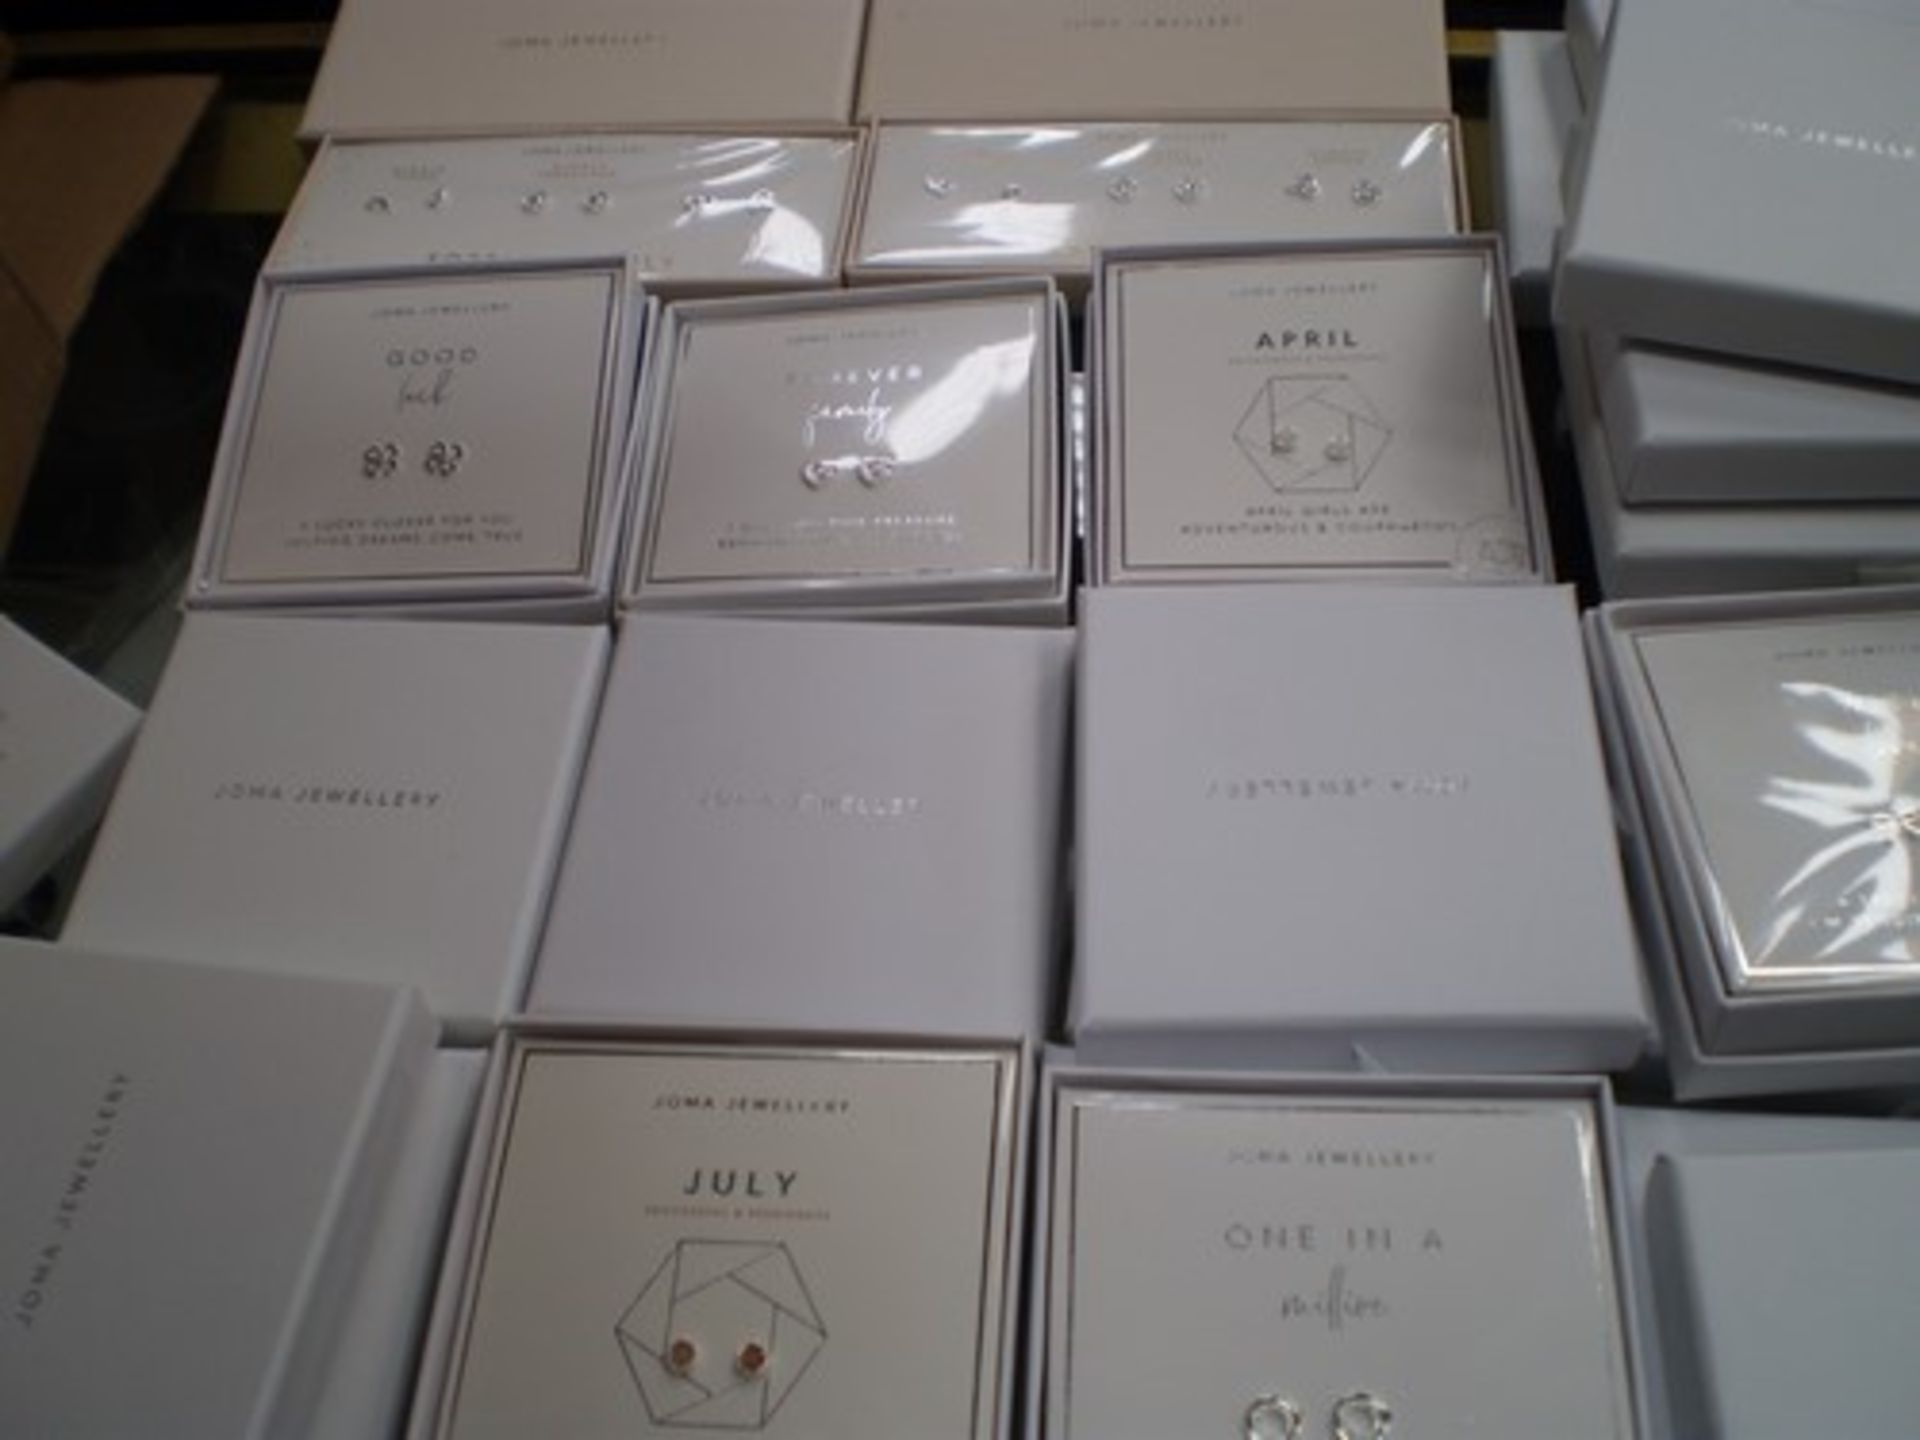 24 x gift boxed Joma jewellery, earrings, various styles and sentiments - new in box (C9C)